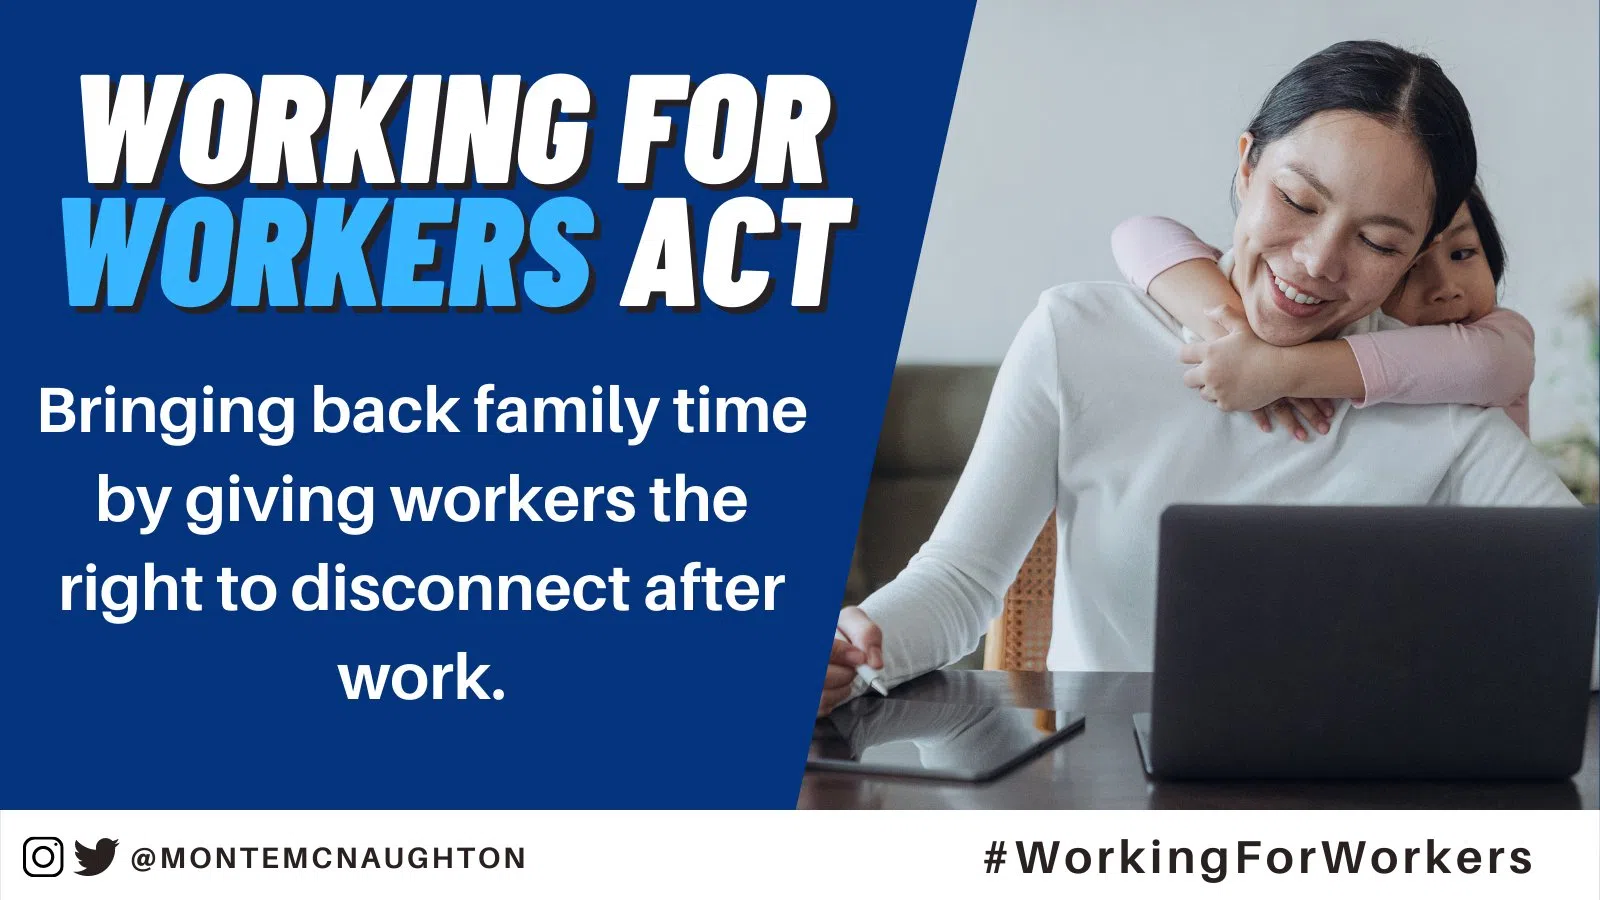 Ontario’s Working for Workers Act Includes “Disconnect” Time Bayshore